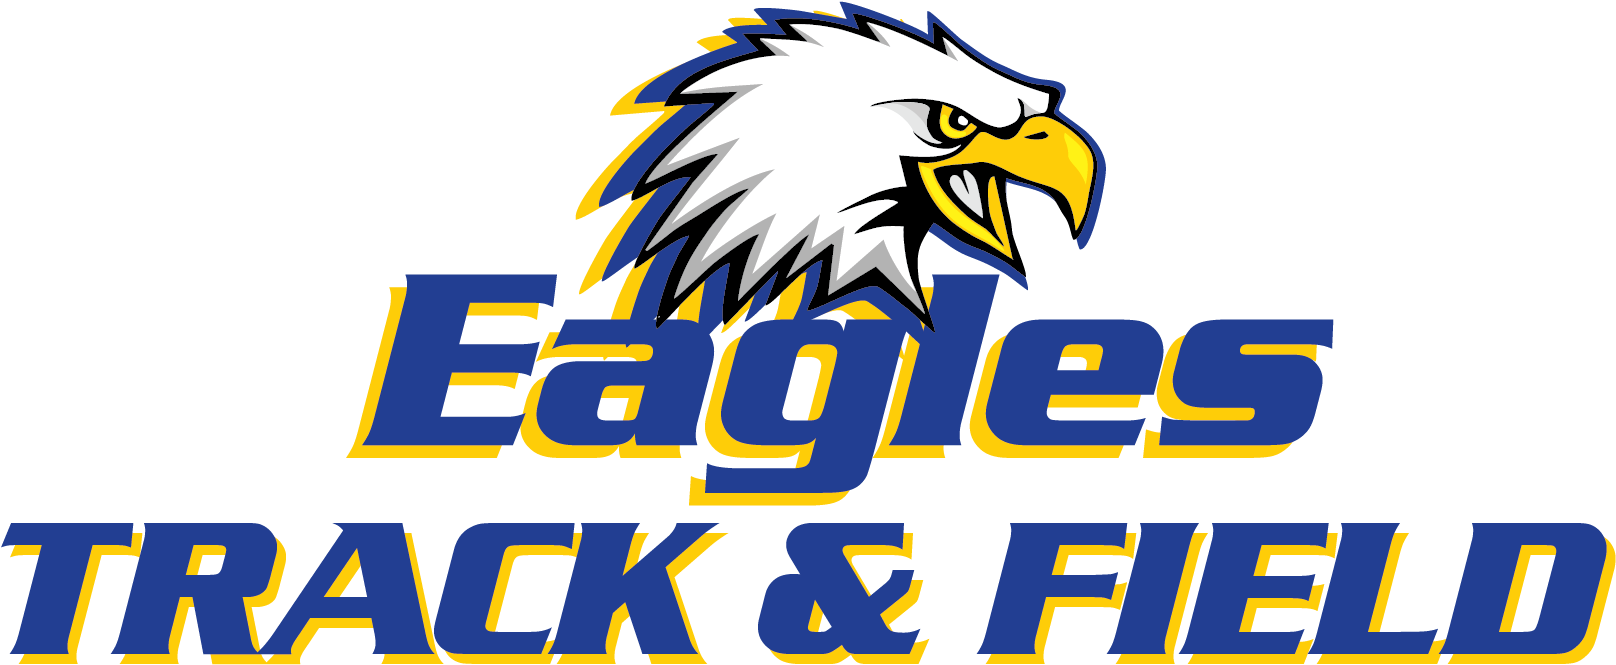 Girls Track And Field Logo For Kids - Eagle Head (1638x694)